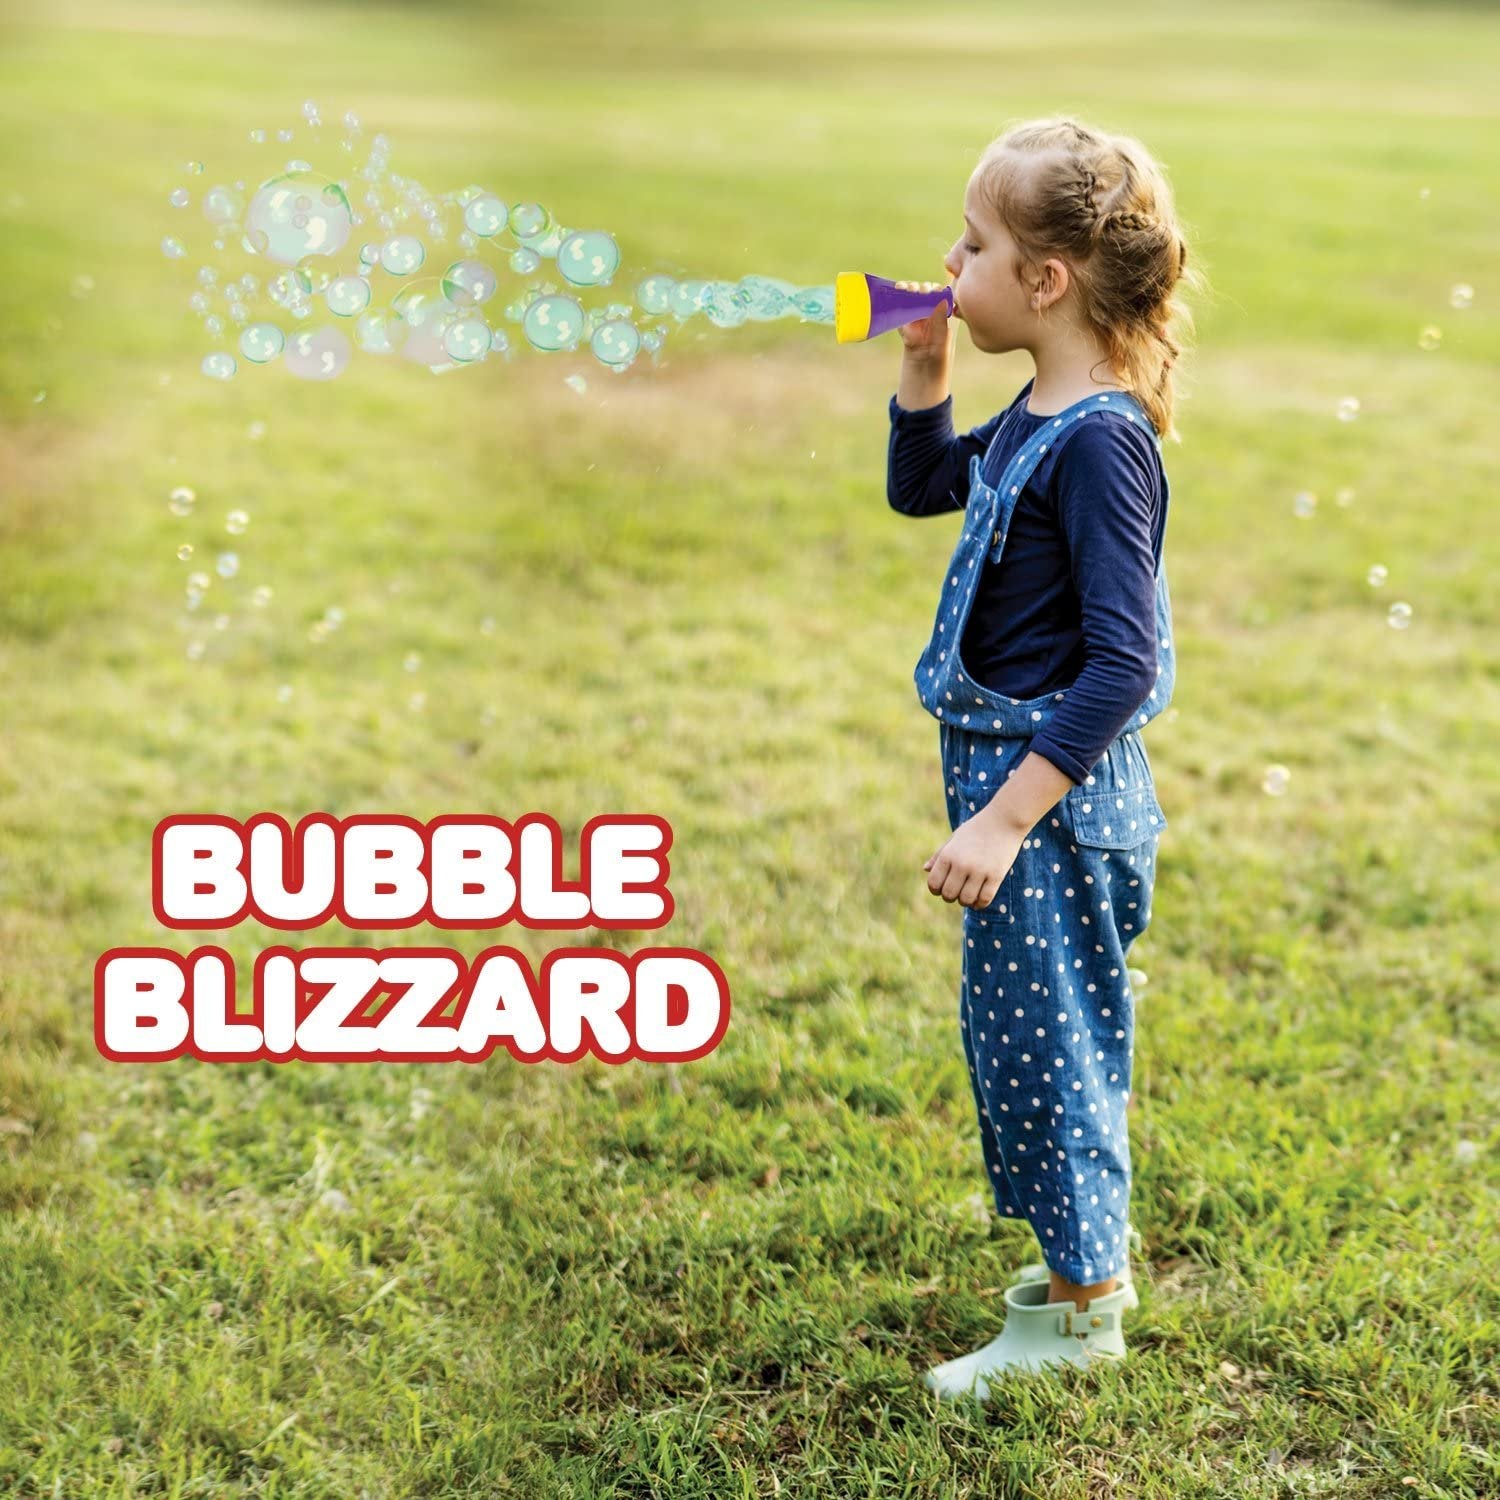 Mini Blizzard Bubble Blower Set by - Set of 4 Bubble Blasters with 4 Bottles of Bubble Mixture - Vibrant Assortment of Color - Non-Toxic Plastic - Fun Summer Toys for Boys and Girls